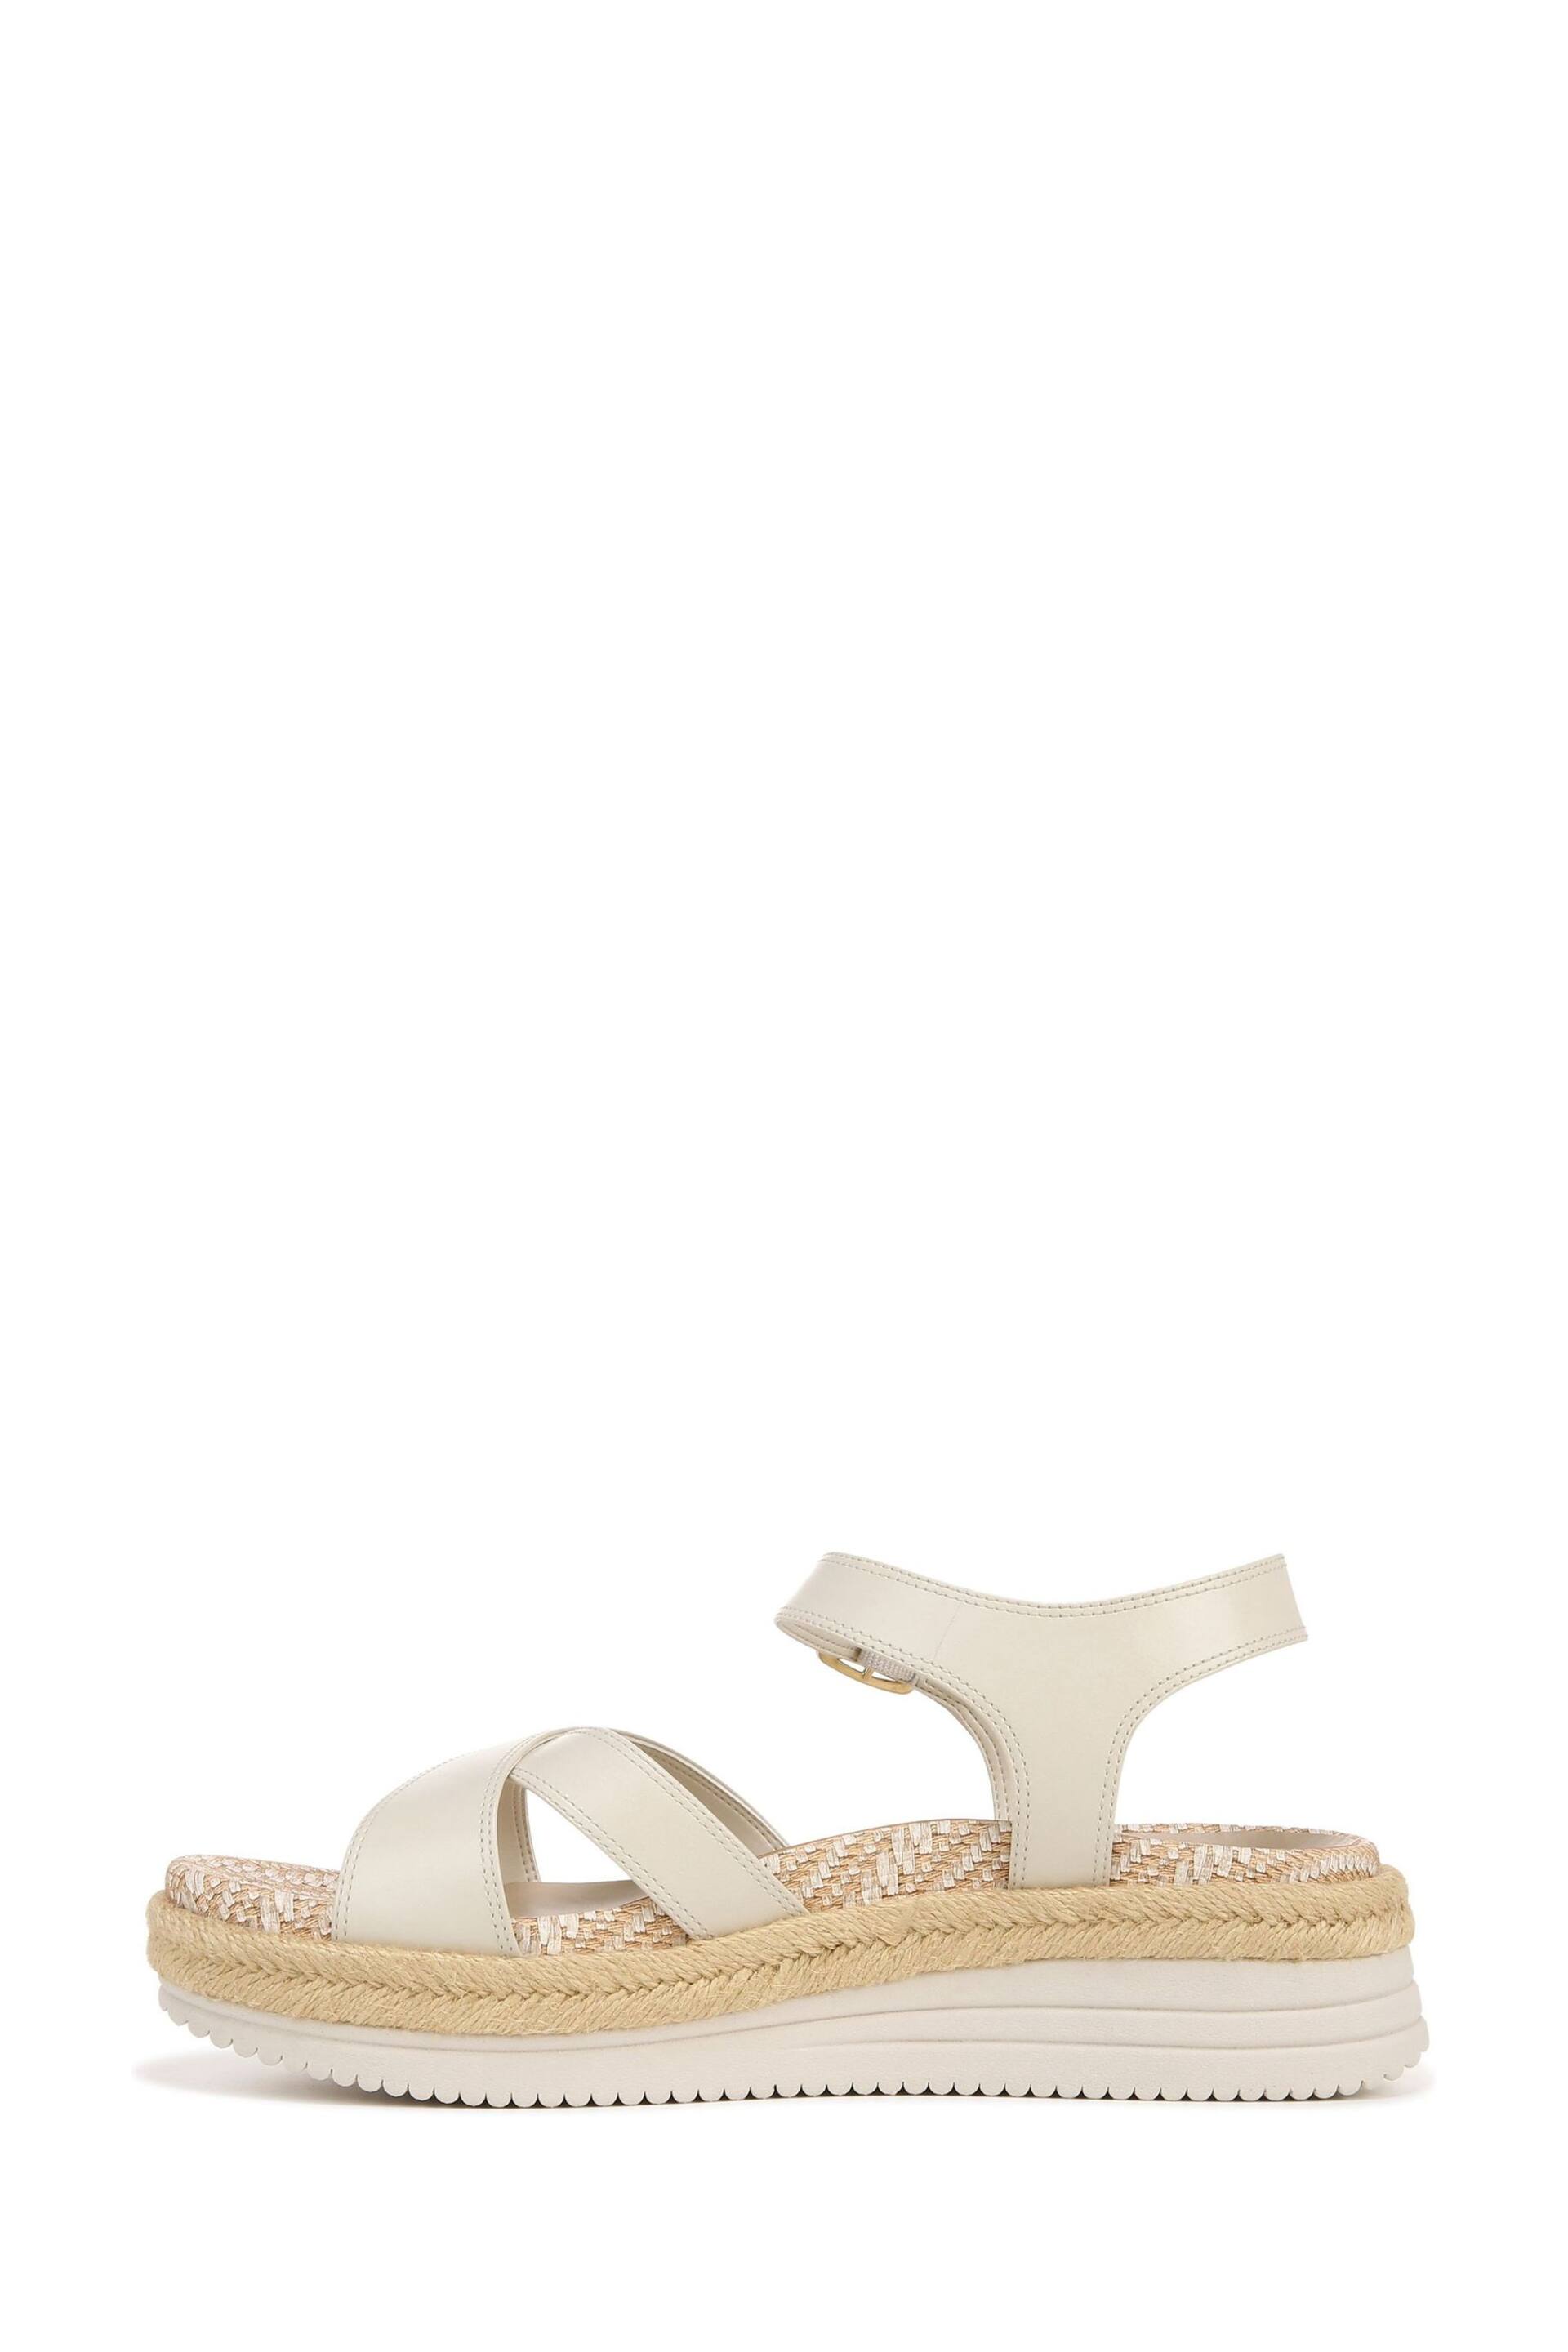 Vionic Mar Ankle Strap Sandals - Image 2 of 7